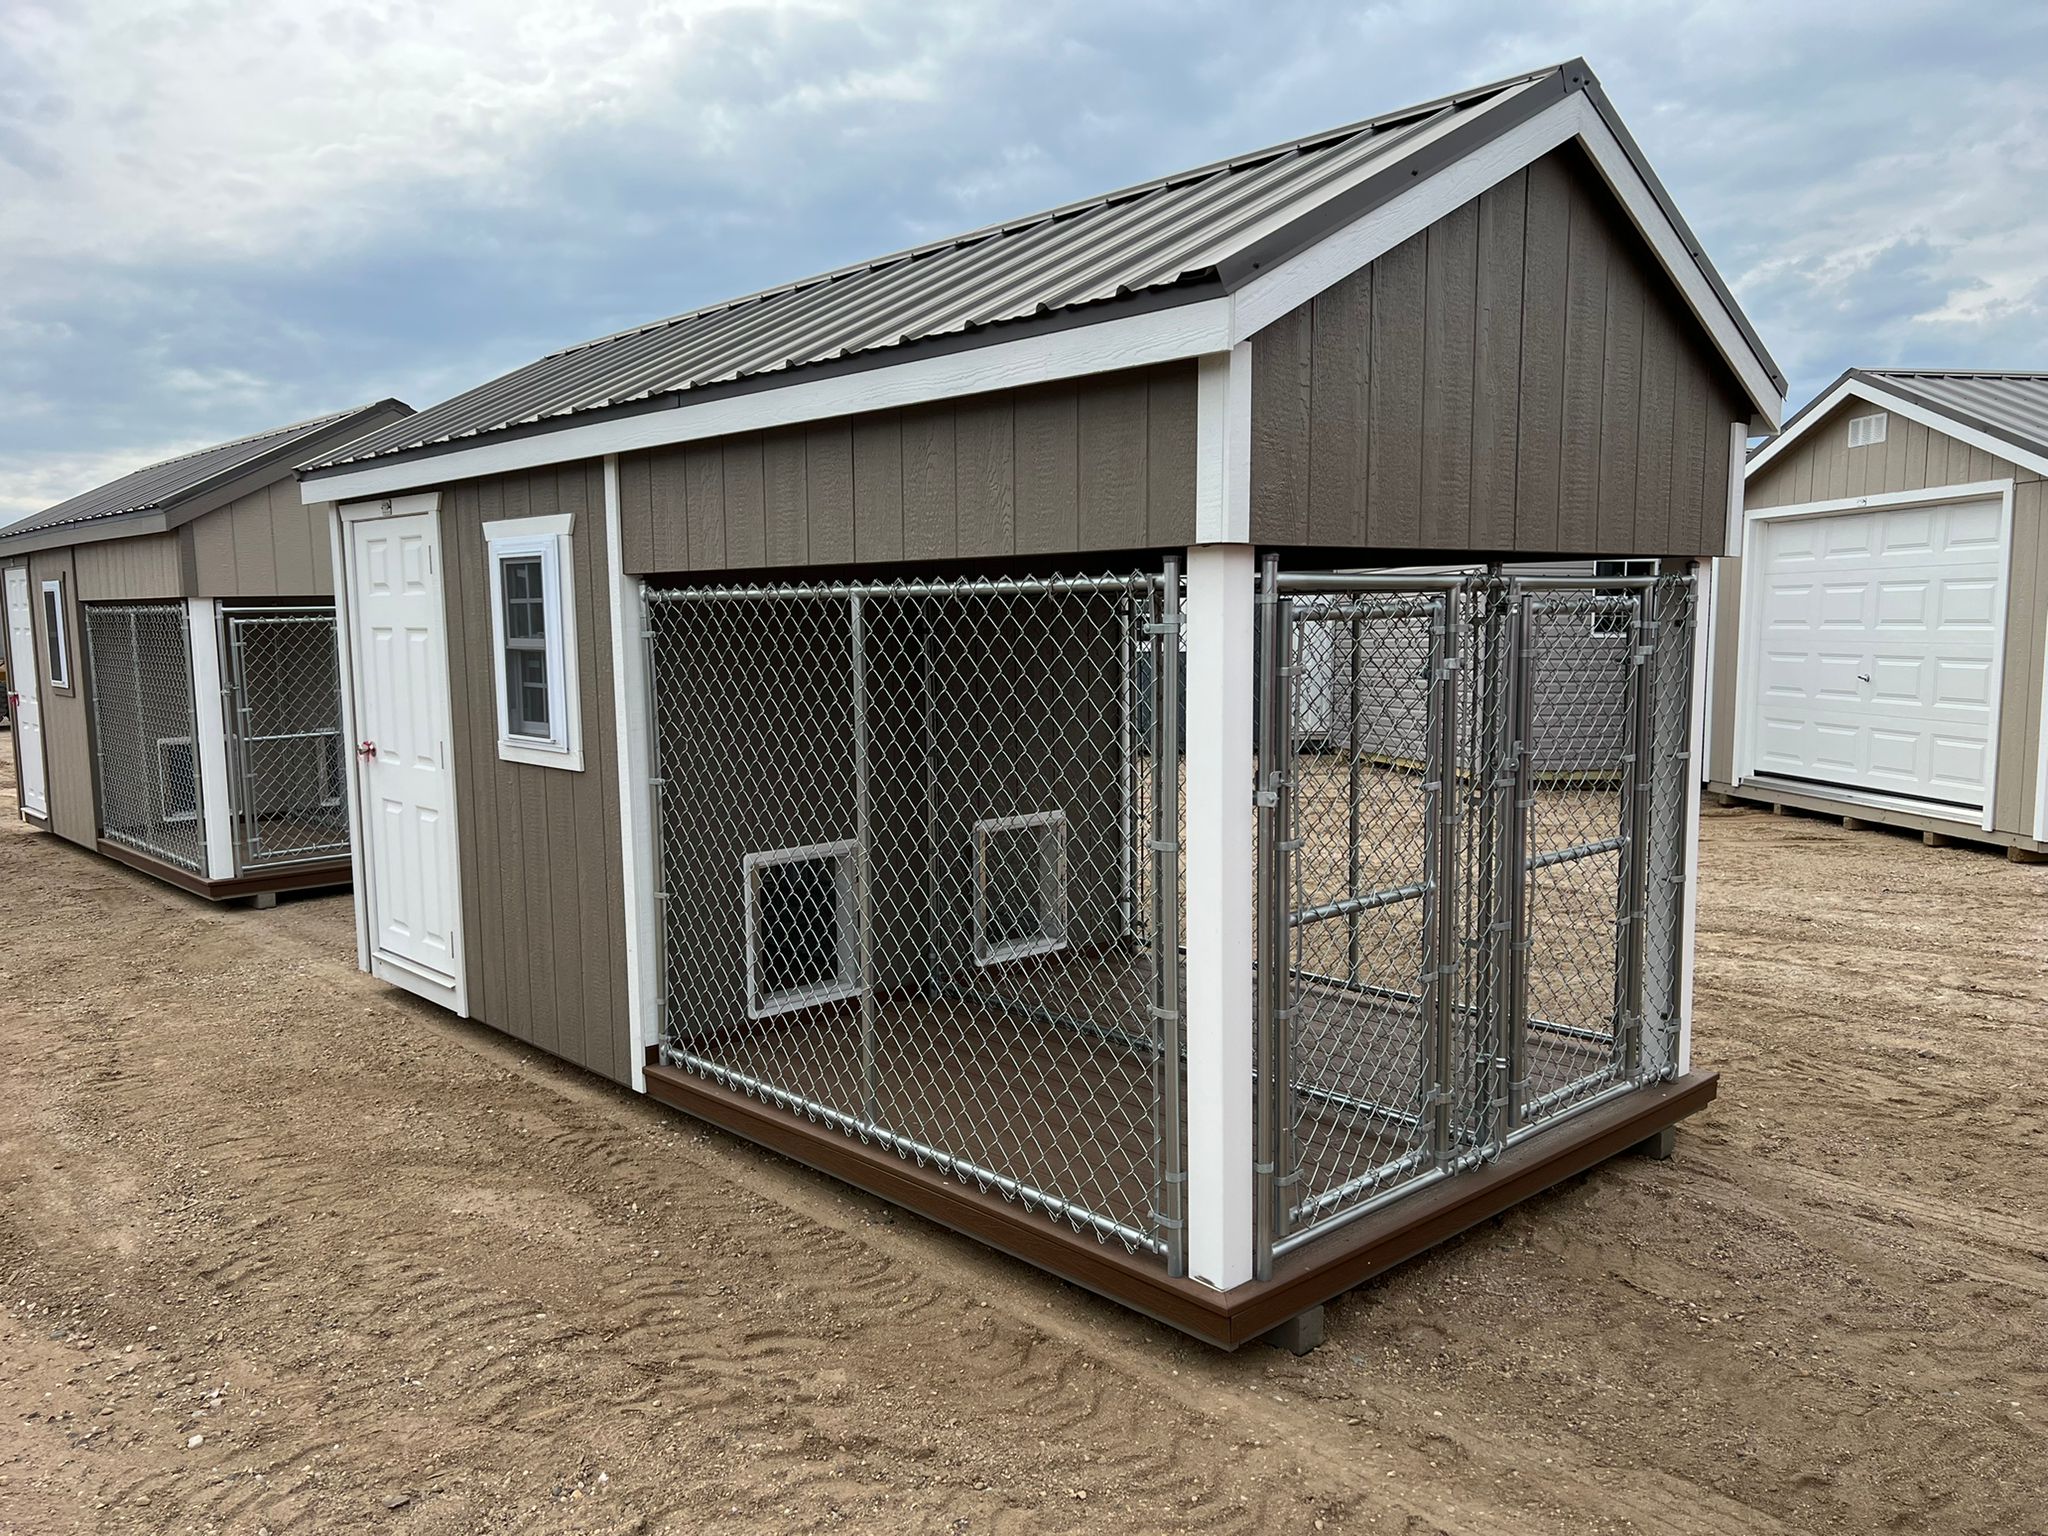 8'x16' A-Frame Double Dog Kennel with Feed Room For Sale| #137131 |  Northland Sheds